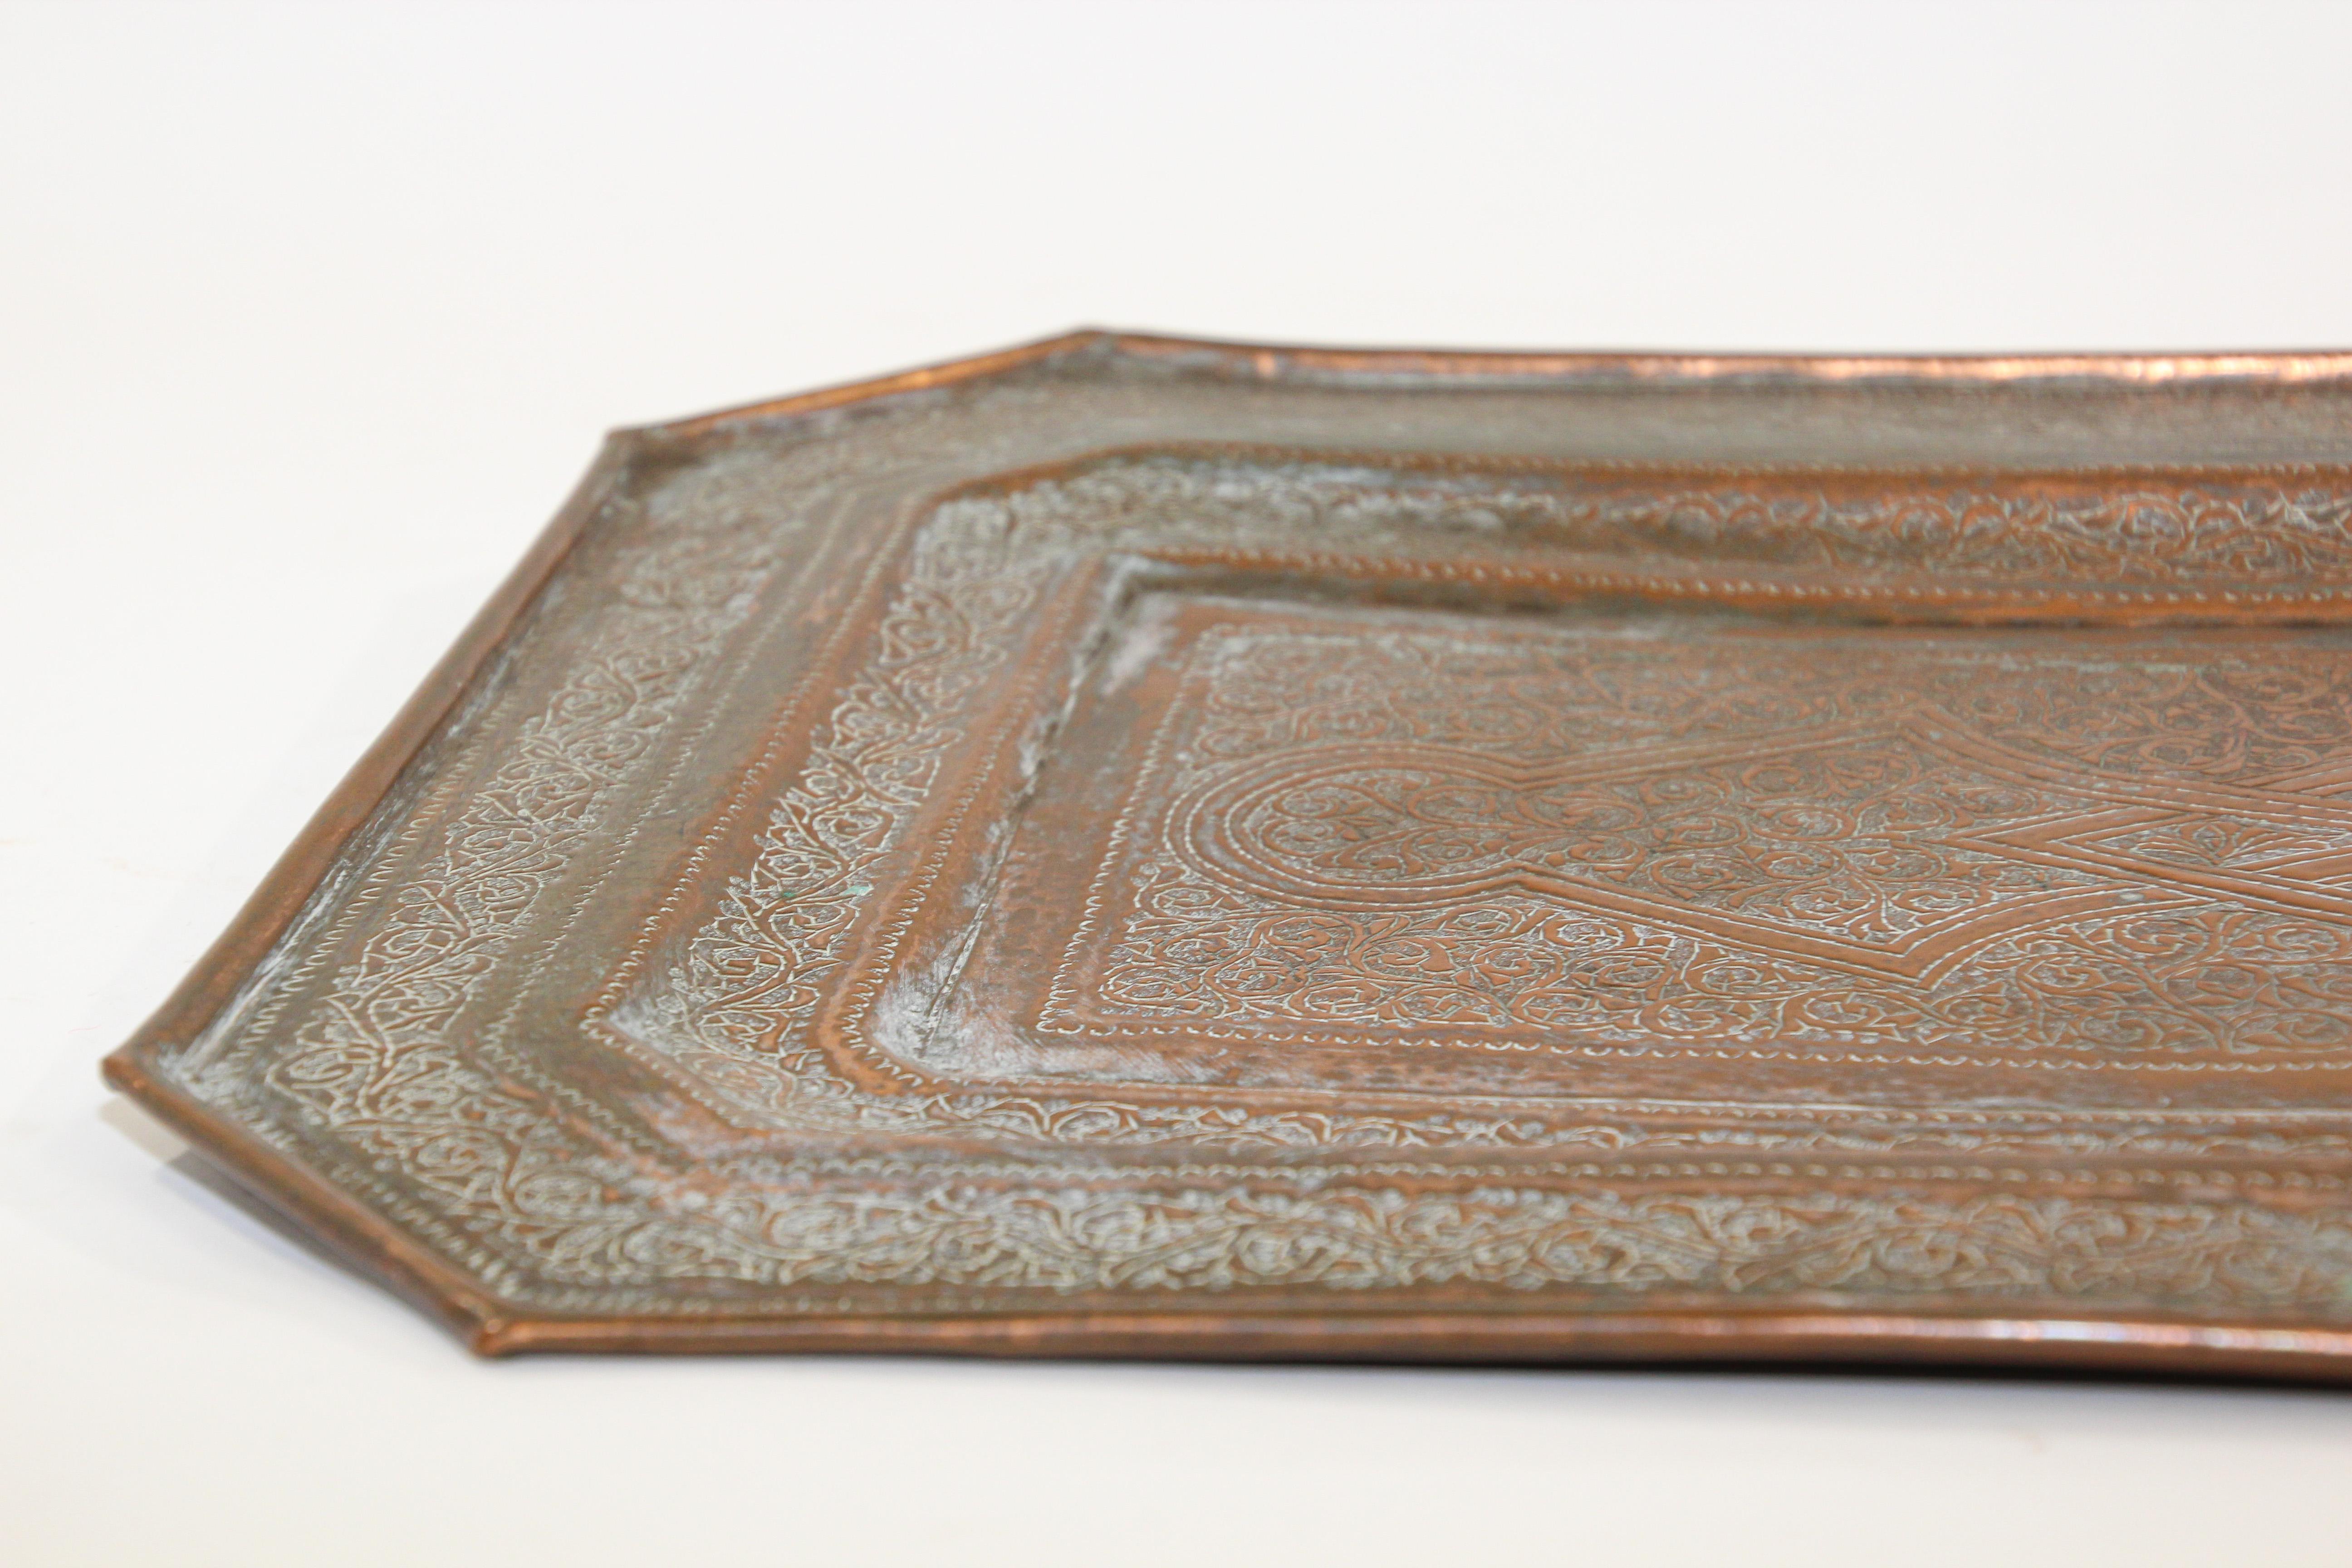 Middle Eastern Octagonal Persian Copper Tray Charger For Sale 3